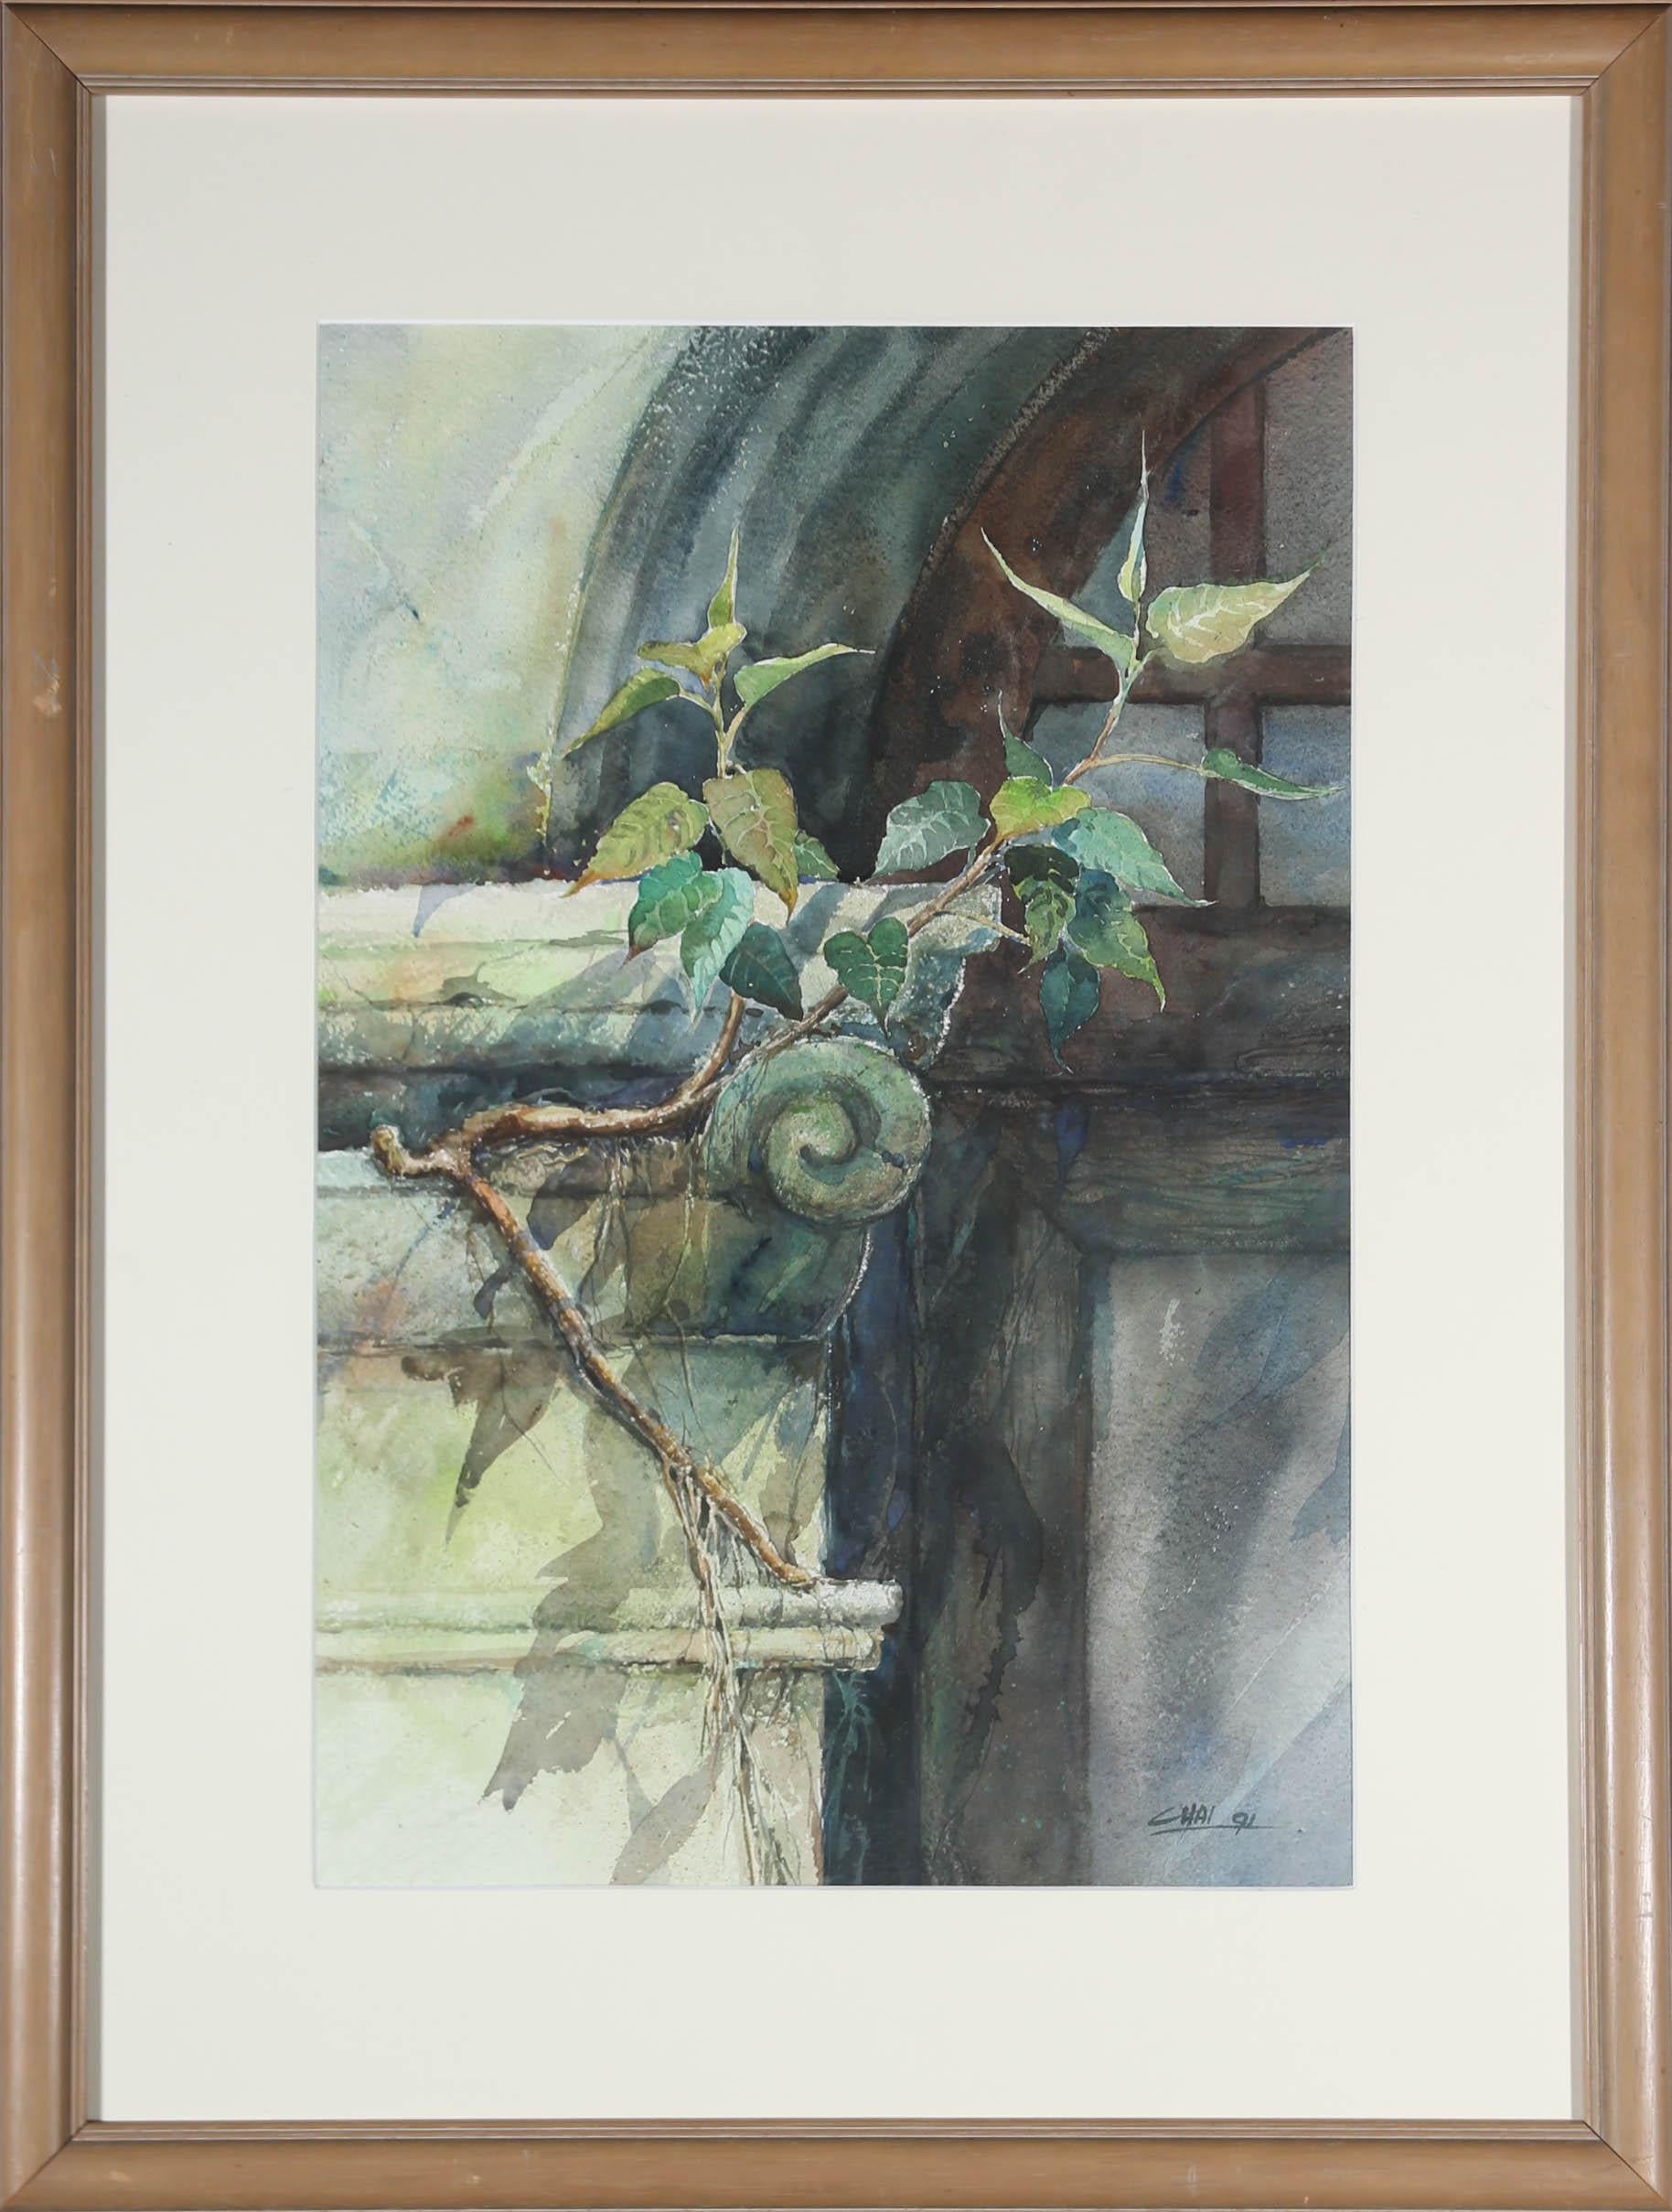 A delightful watercolour study depicting plant winding around the cornice of a door. Chia Seng Chai is a member of the Malaysian Watercolour Society. Signed to the lower right. Presented in a wooden frame. On paper.
